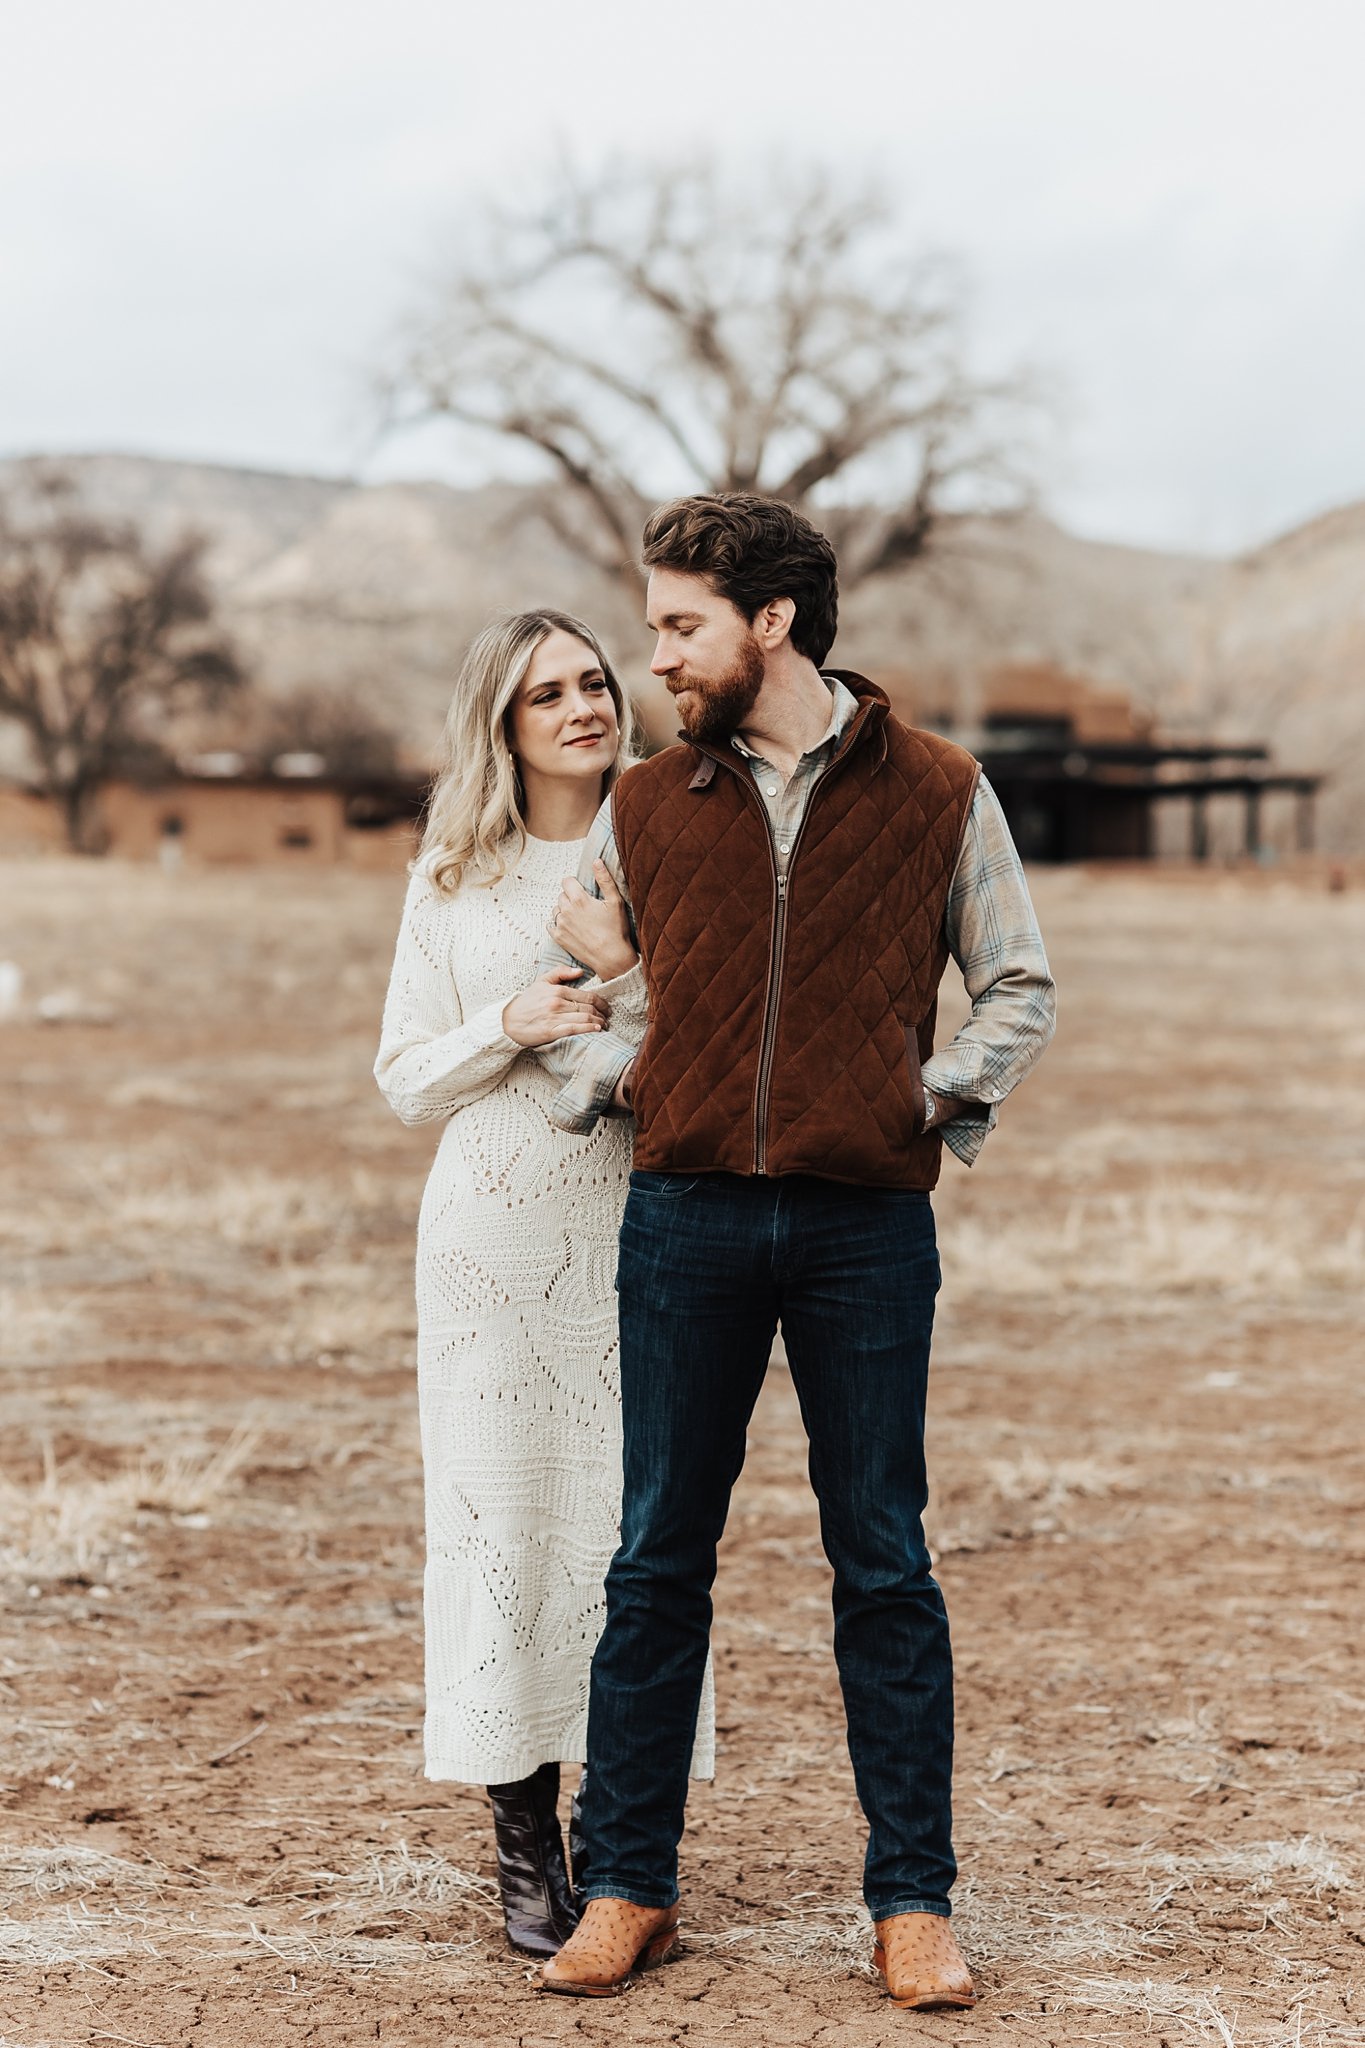 Alicia+lucia+photography+-+albuquerque+wedding+photographer+-+santa+fe+wedding+photography+-+new+mexico+wedding+photographer+-+new+mexico+wedding+-+southwest+engagement+-+ghost+ranch+engagement+-+ghost+ranch+wedding_0022.jpg